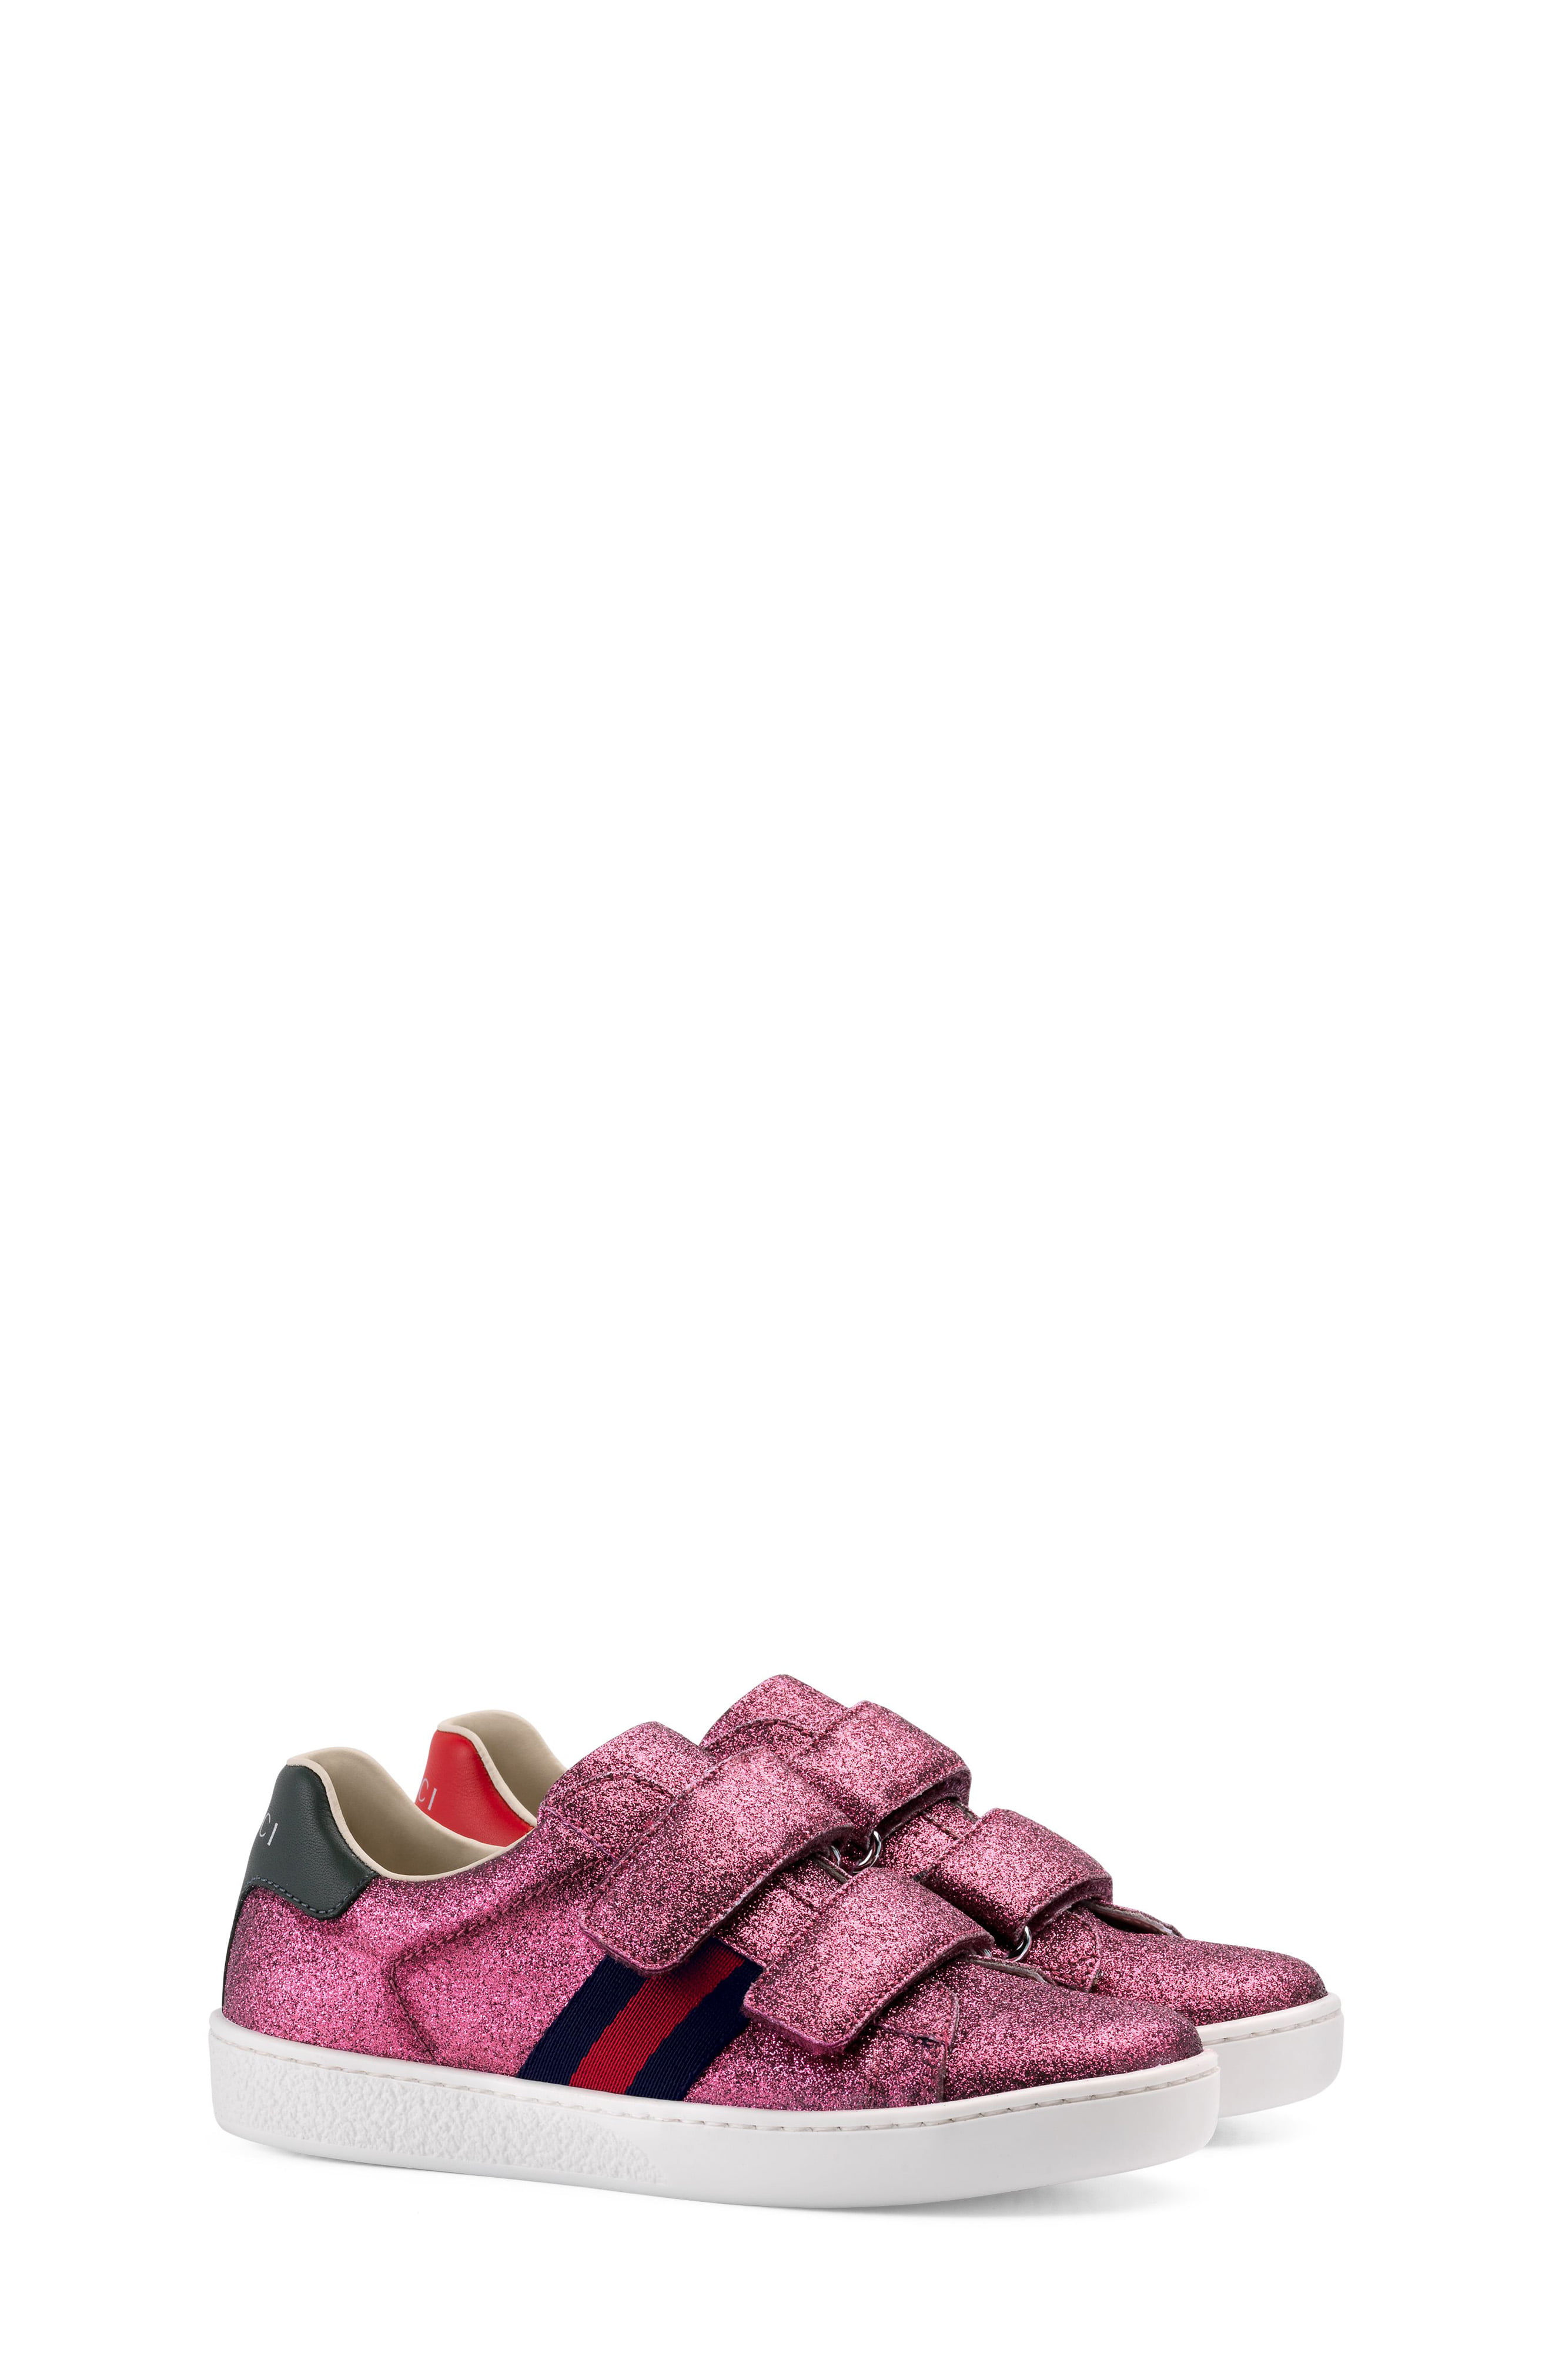 pink gucci shoes for toddlers